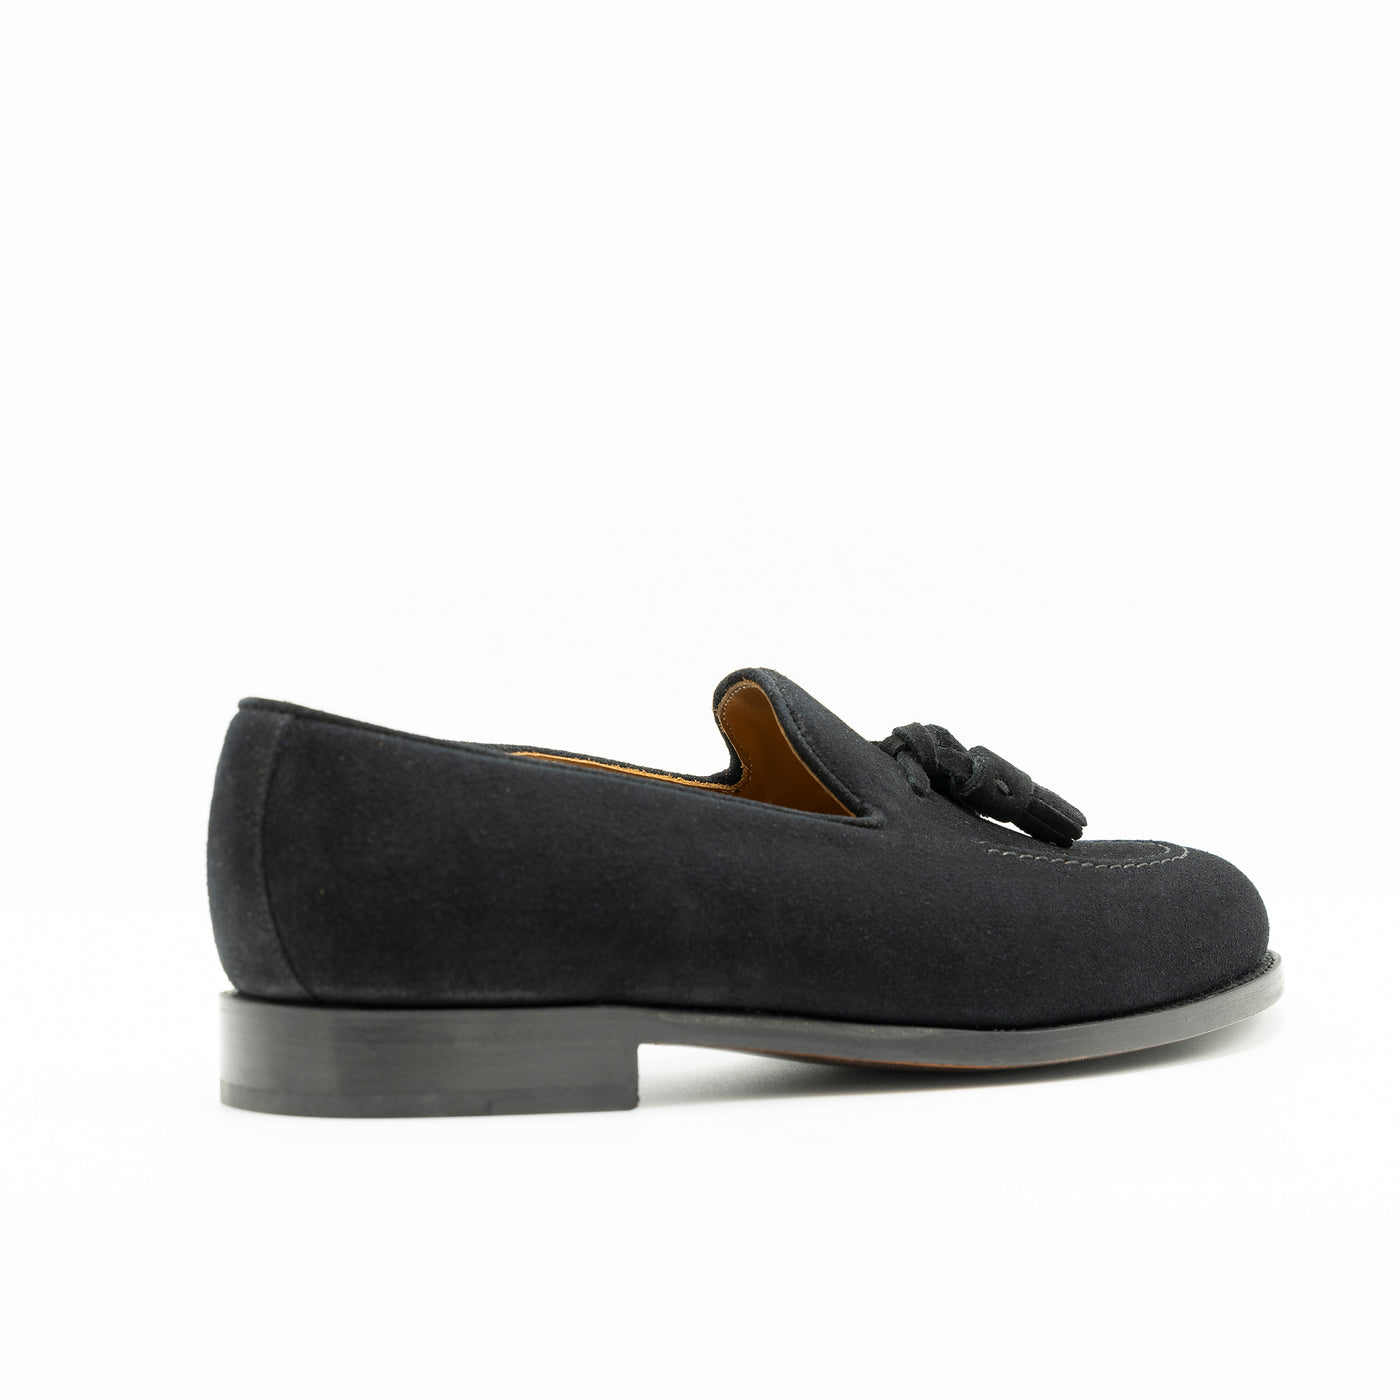 Men's tassel loafer in black suede. Set on goodyear welted soles and edgestiched leather soles. 